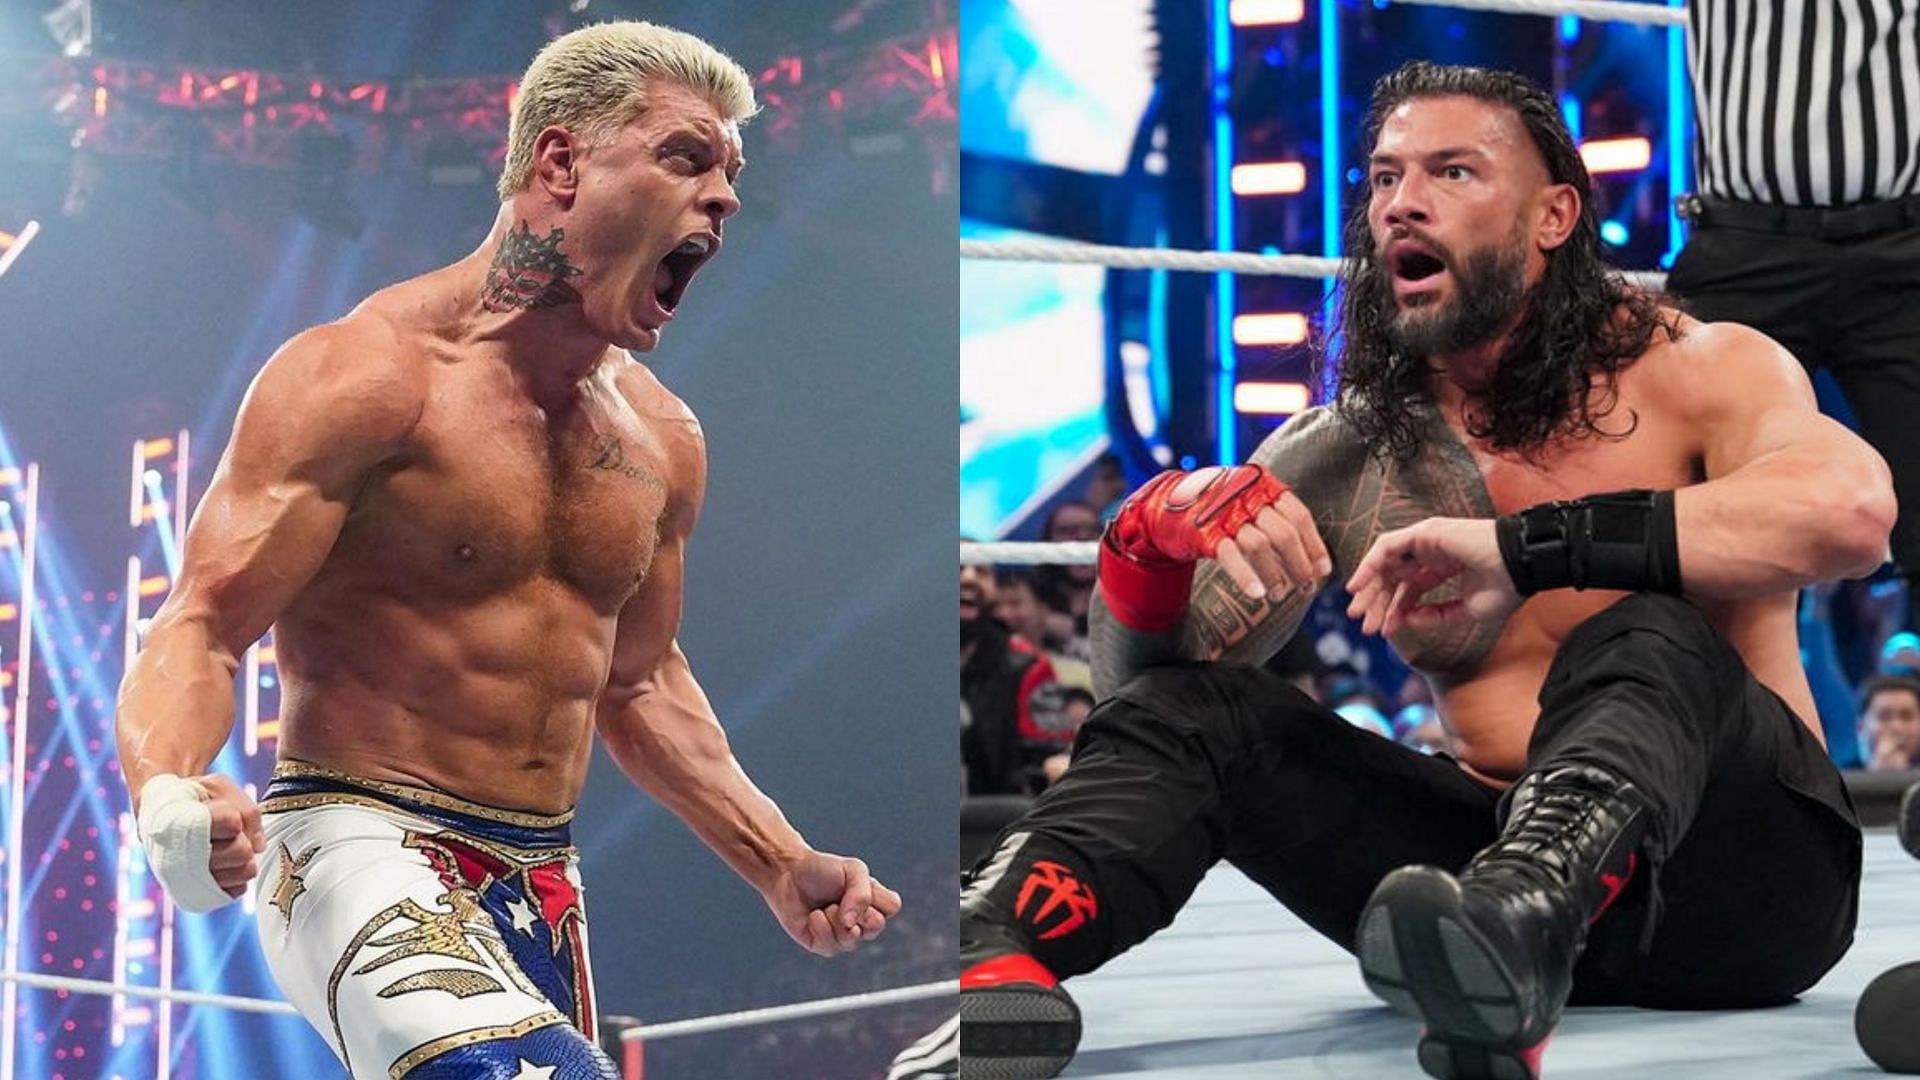 Cody Rhodes (left) and Undisputed WWE Universal Champion Roman Reigns (right)